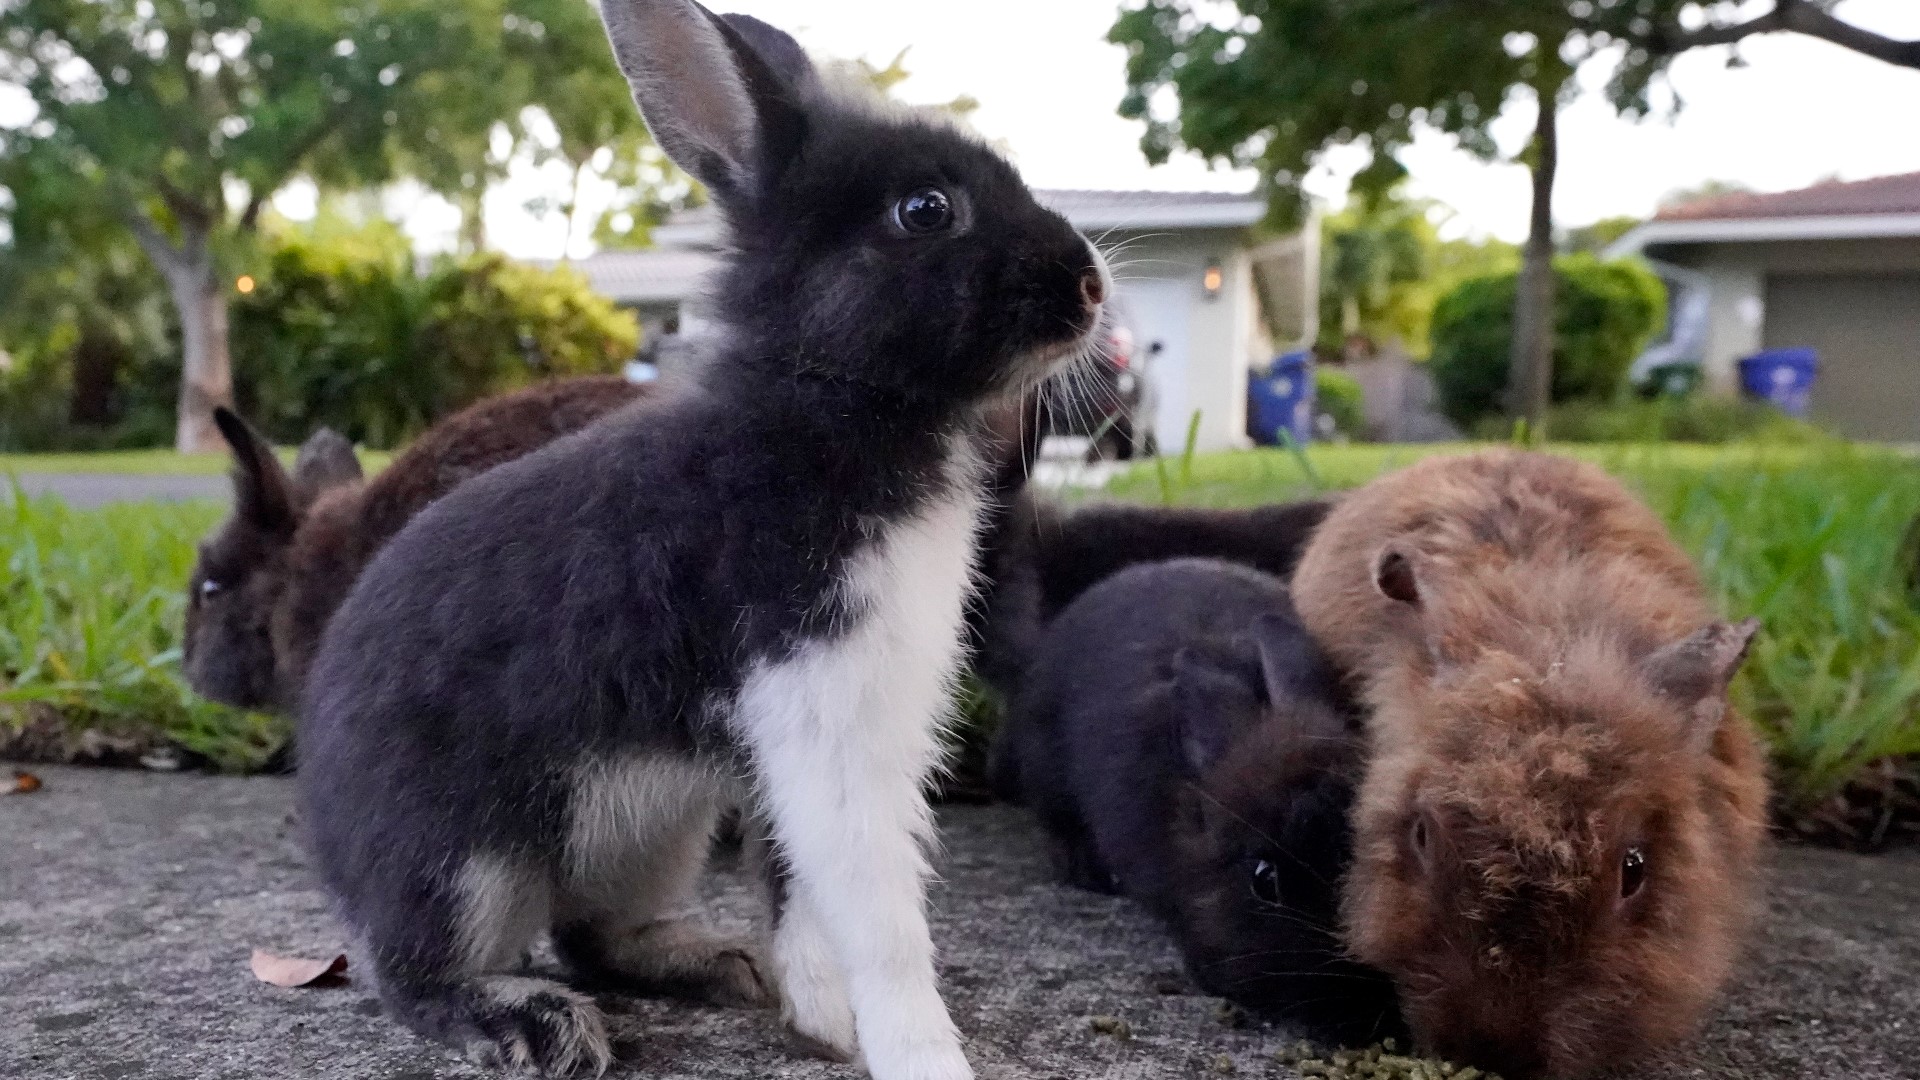 Between 60 and 100 lionhead rabbits have taken up residence in a suburban Fort Lauderdale community after a backyard breeder let hers loose.